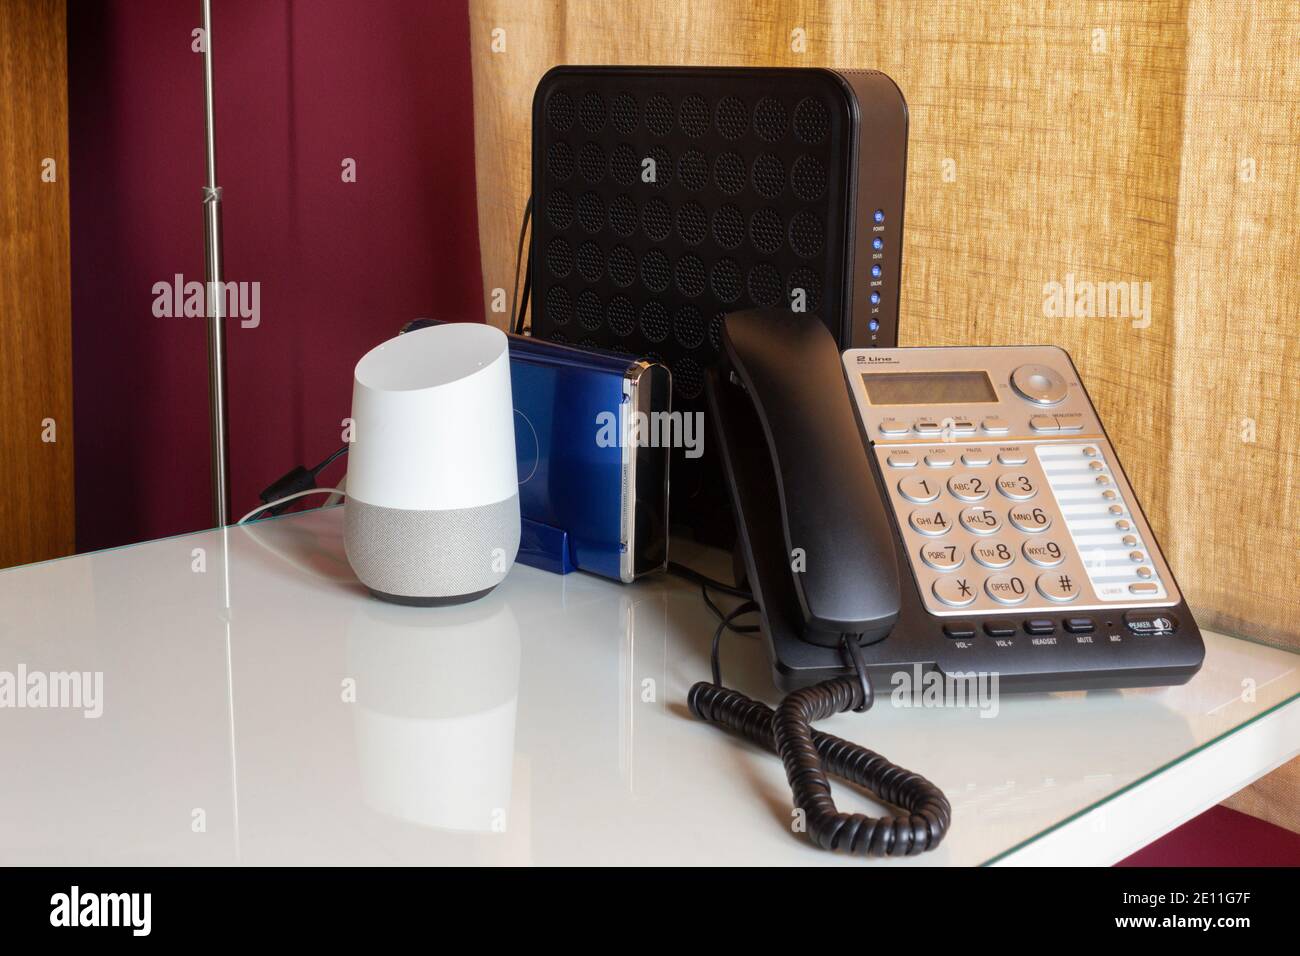 home office set up with a voice activated, virtual smart assistant, a landline telephone, and two routers on a white desk with  a burgundy and yellow Stock Photo